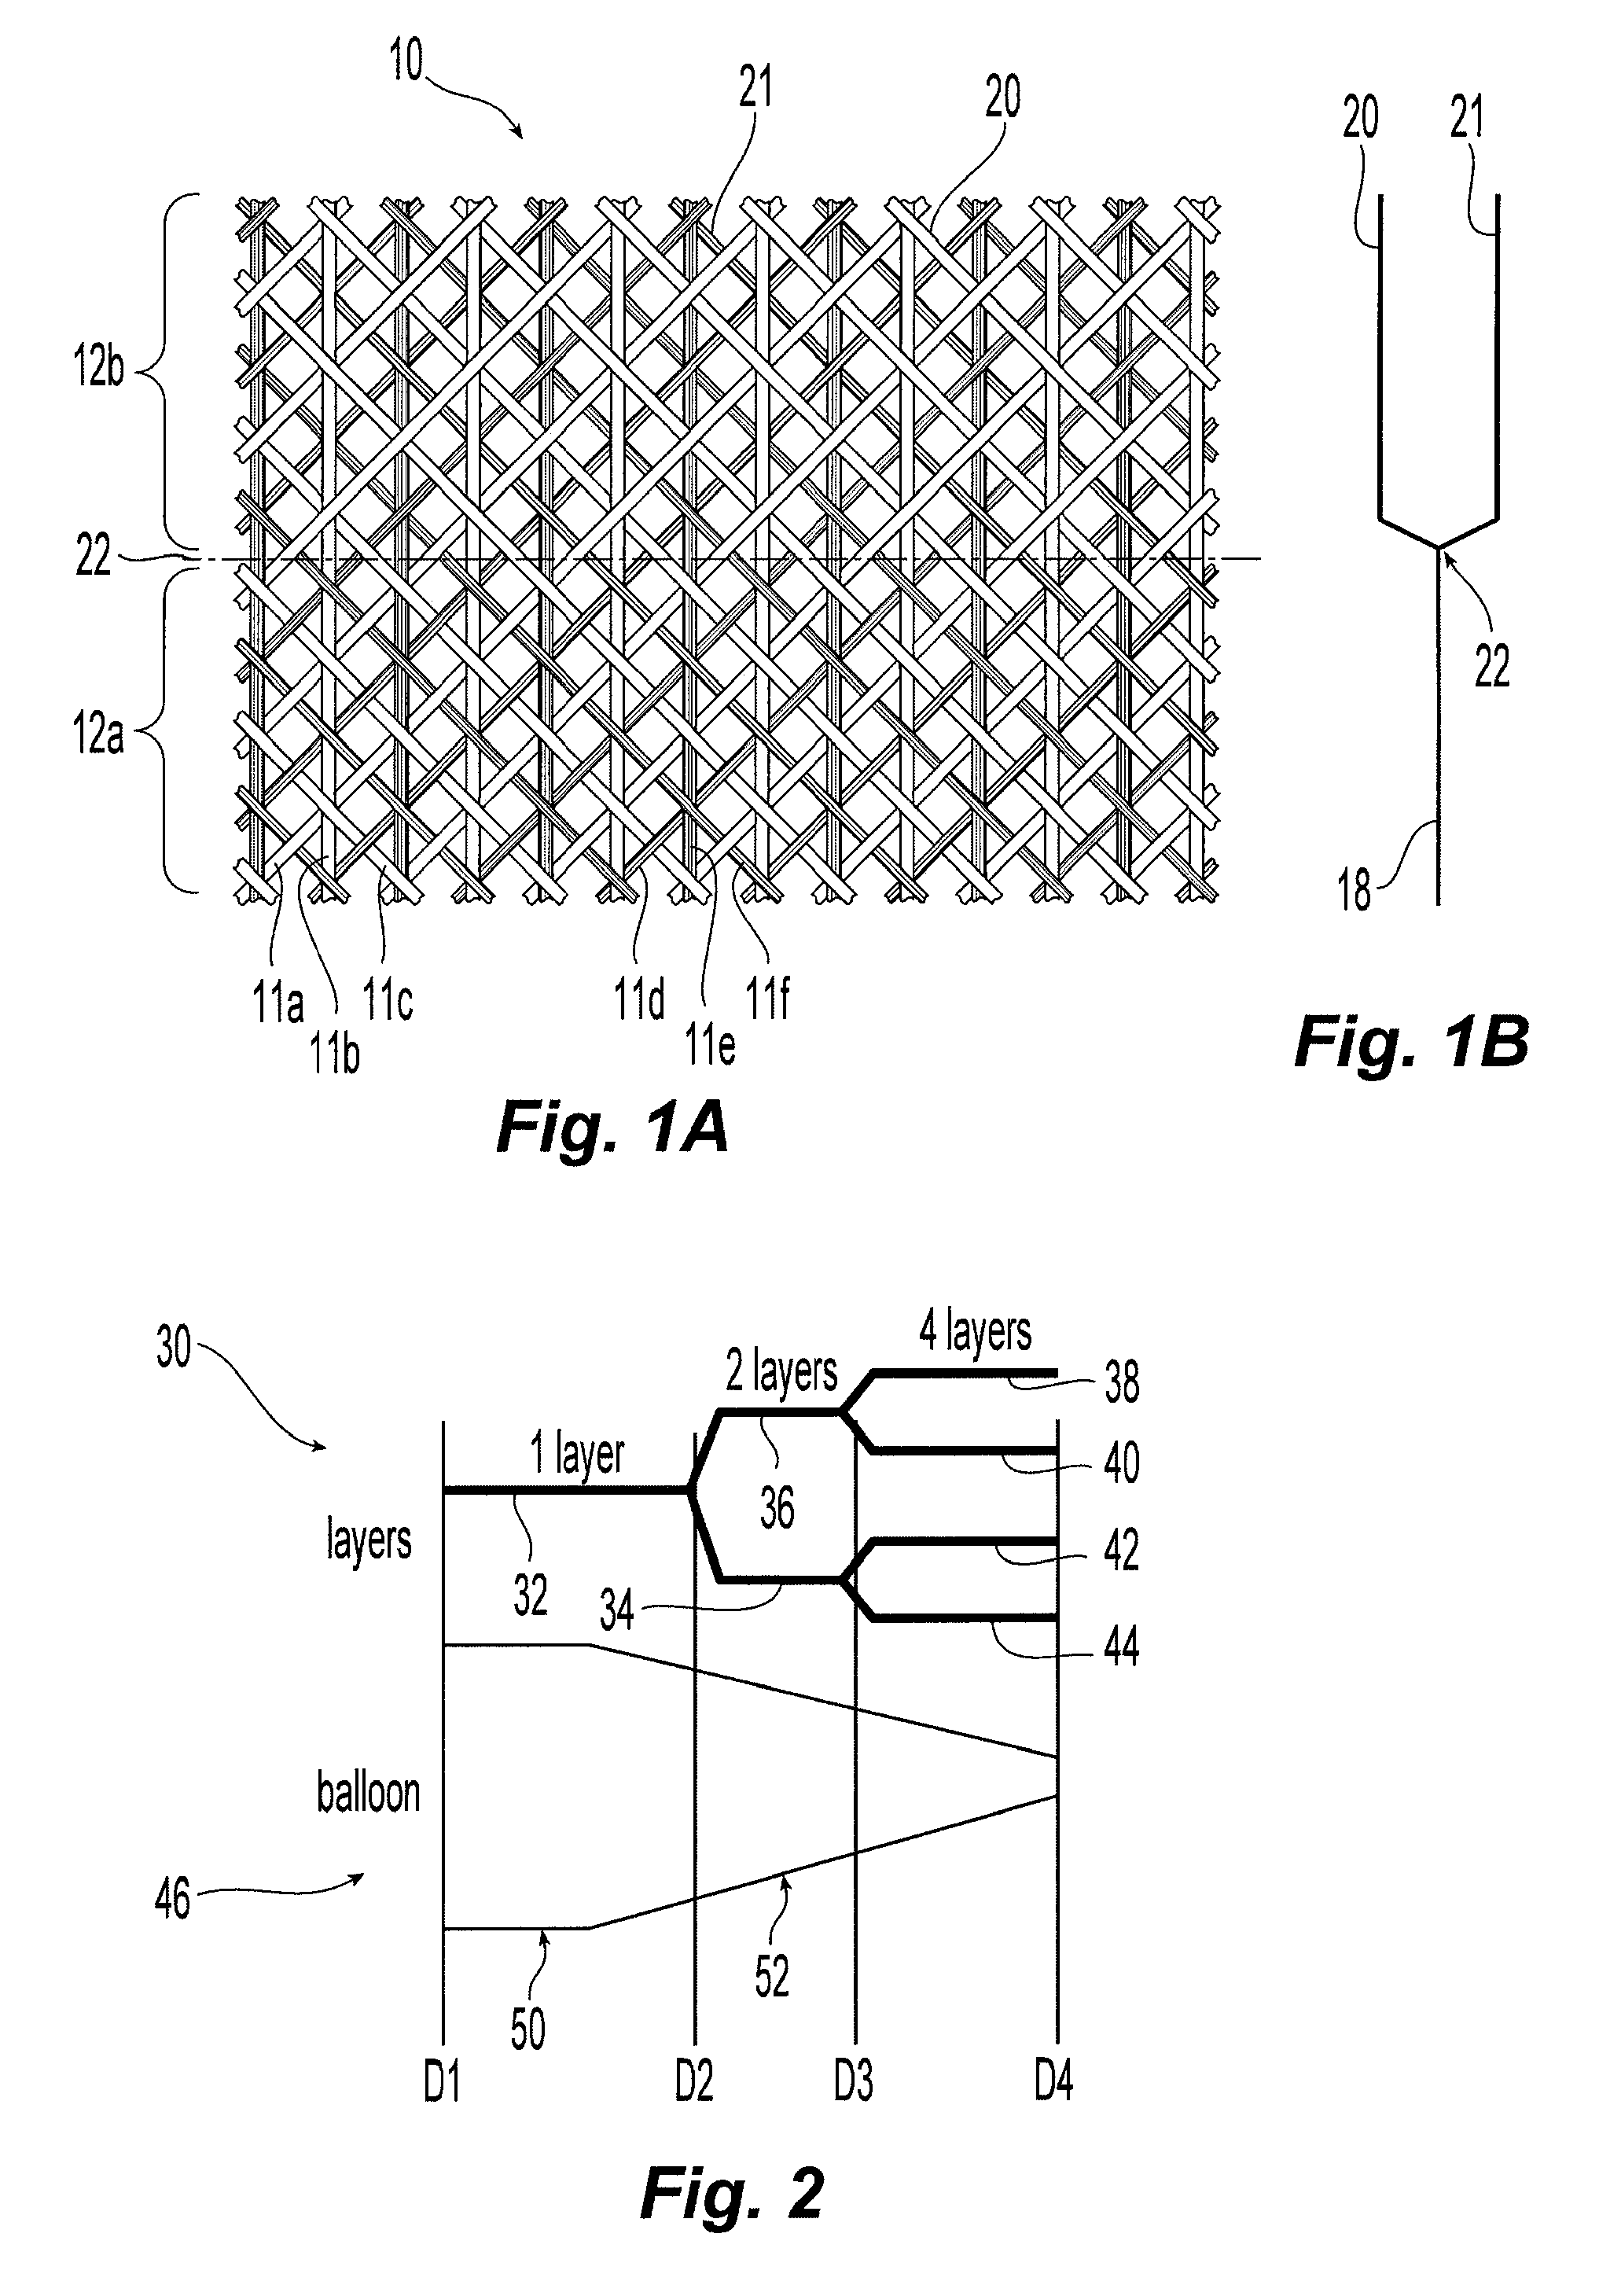 Balloon with dividing fabric layers and method for braiding over three-dimensional forms